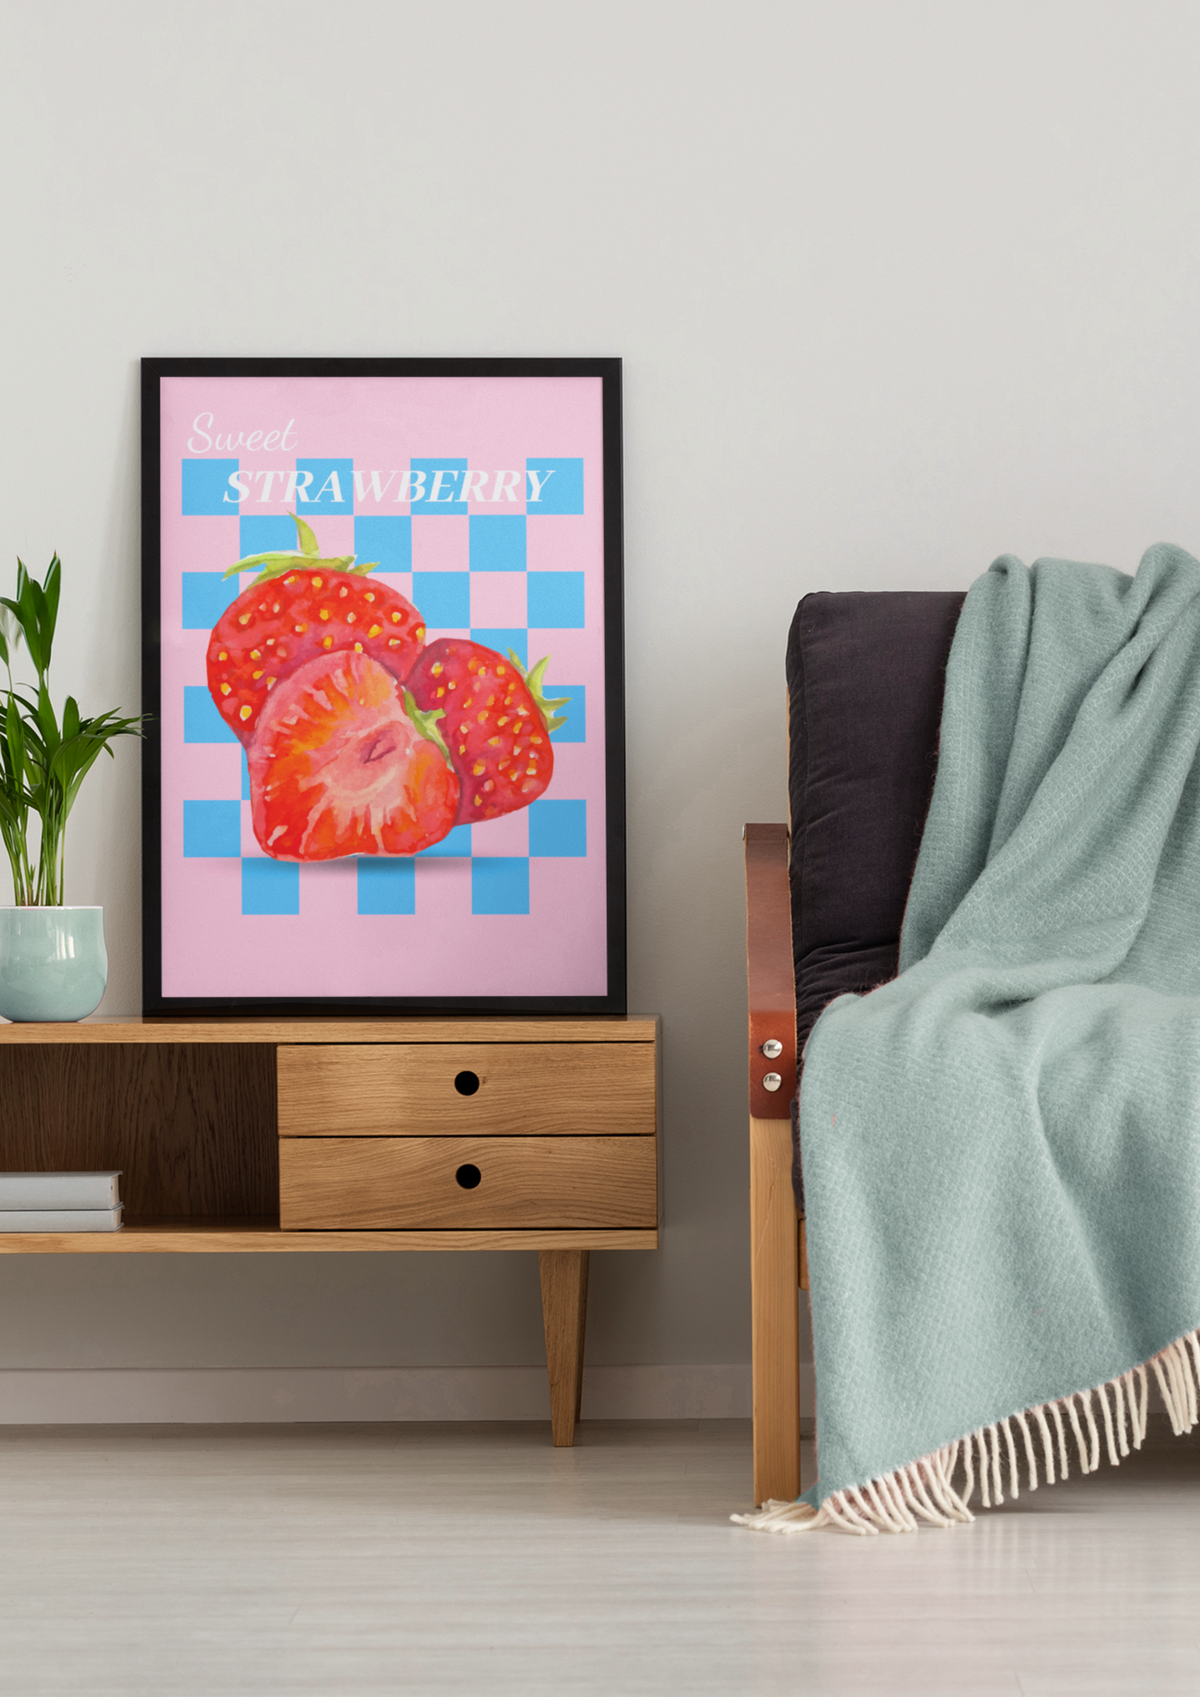 Sweet Strawberry Poster